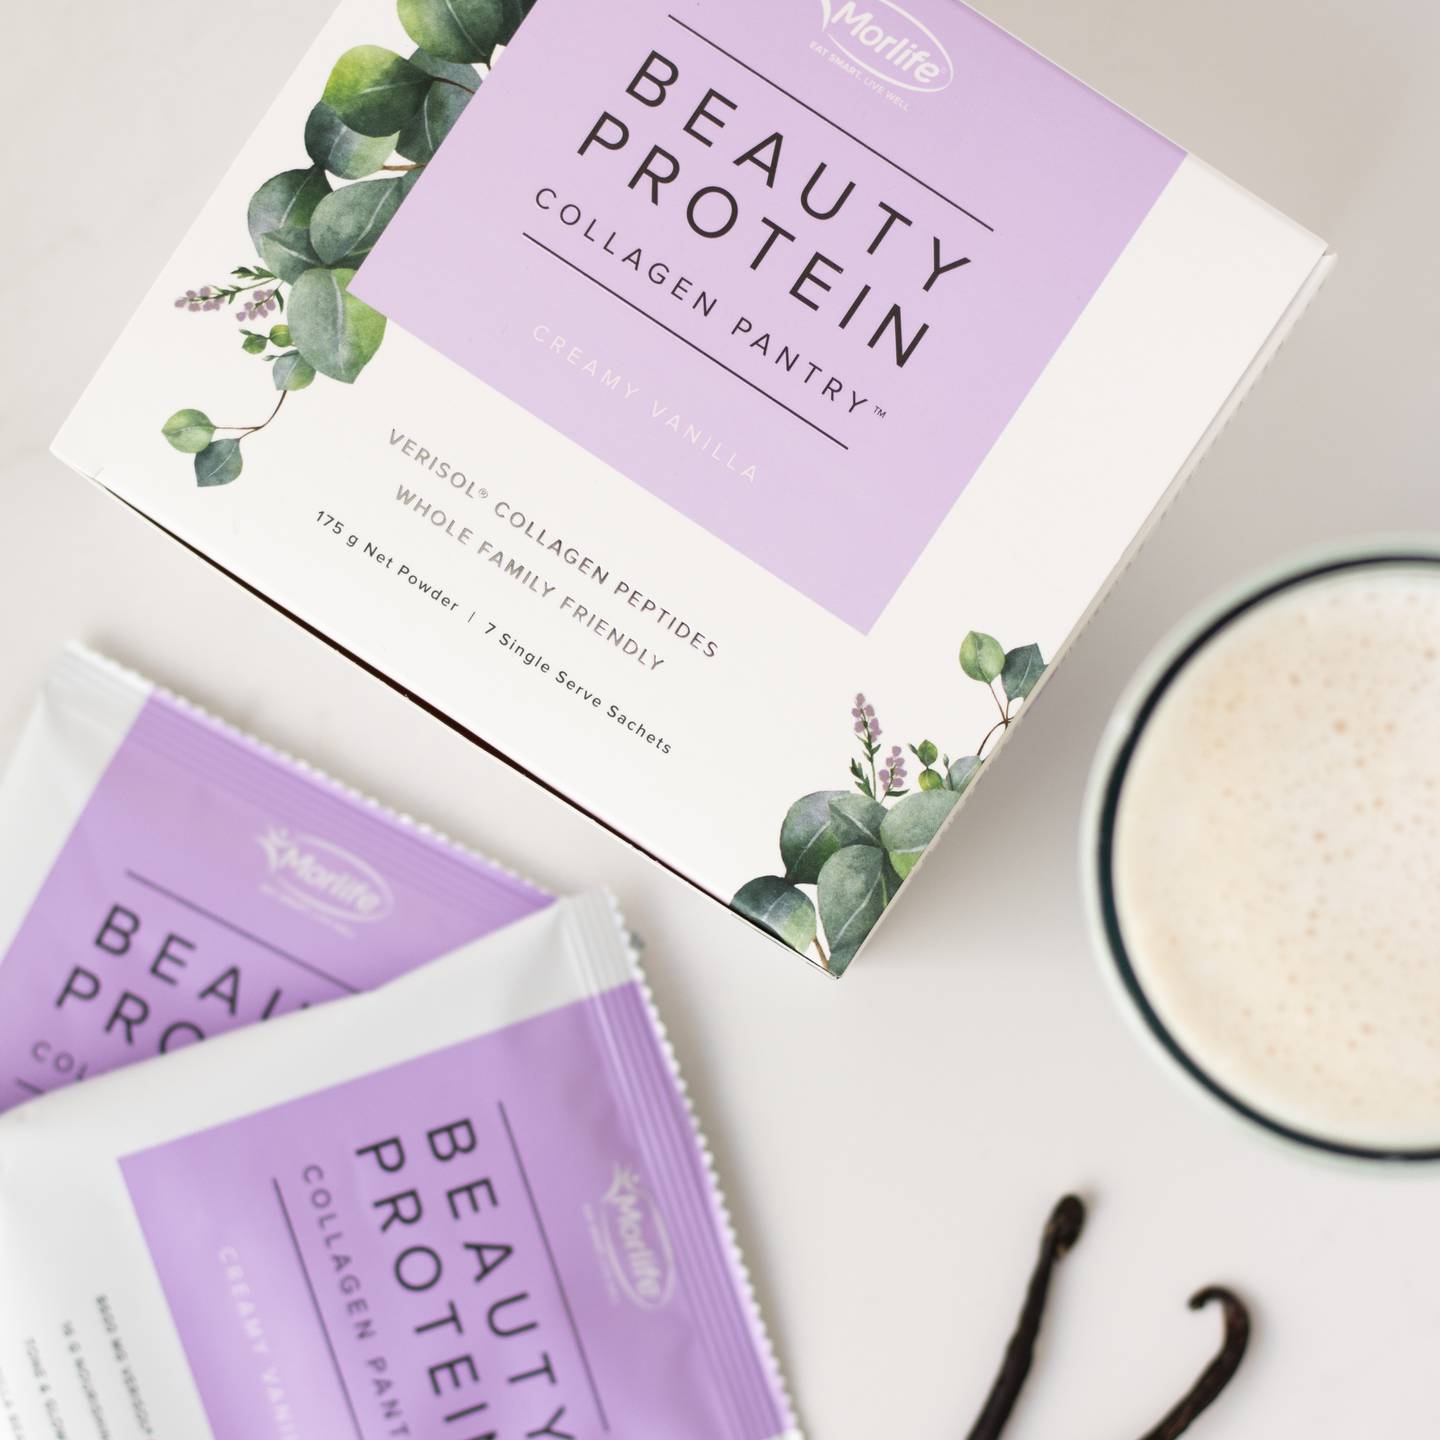 Vanilla Beauty Protein from Collagen Pantry. Photo: The Skincare Edit